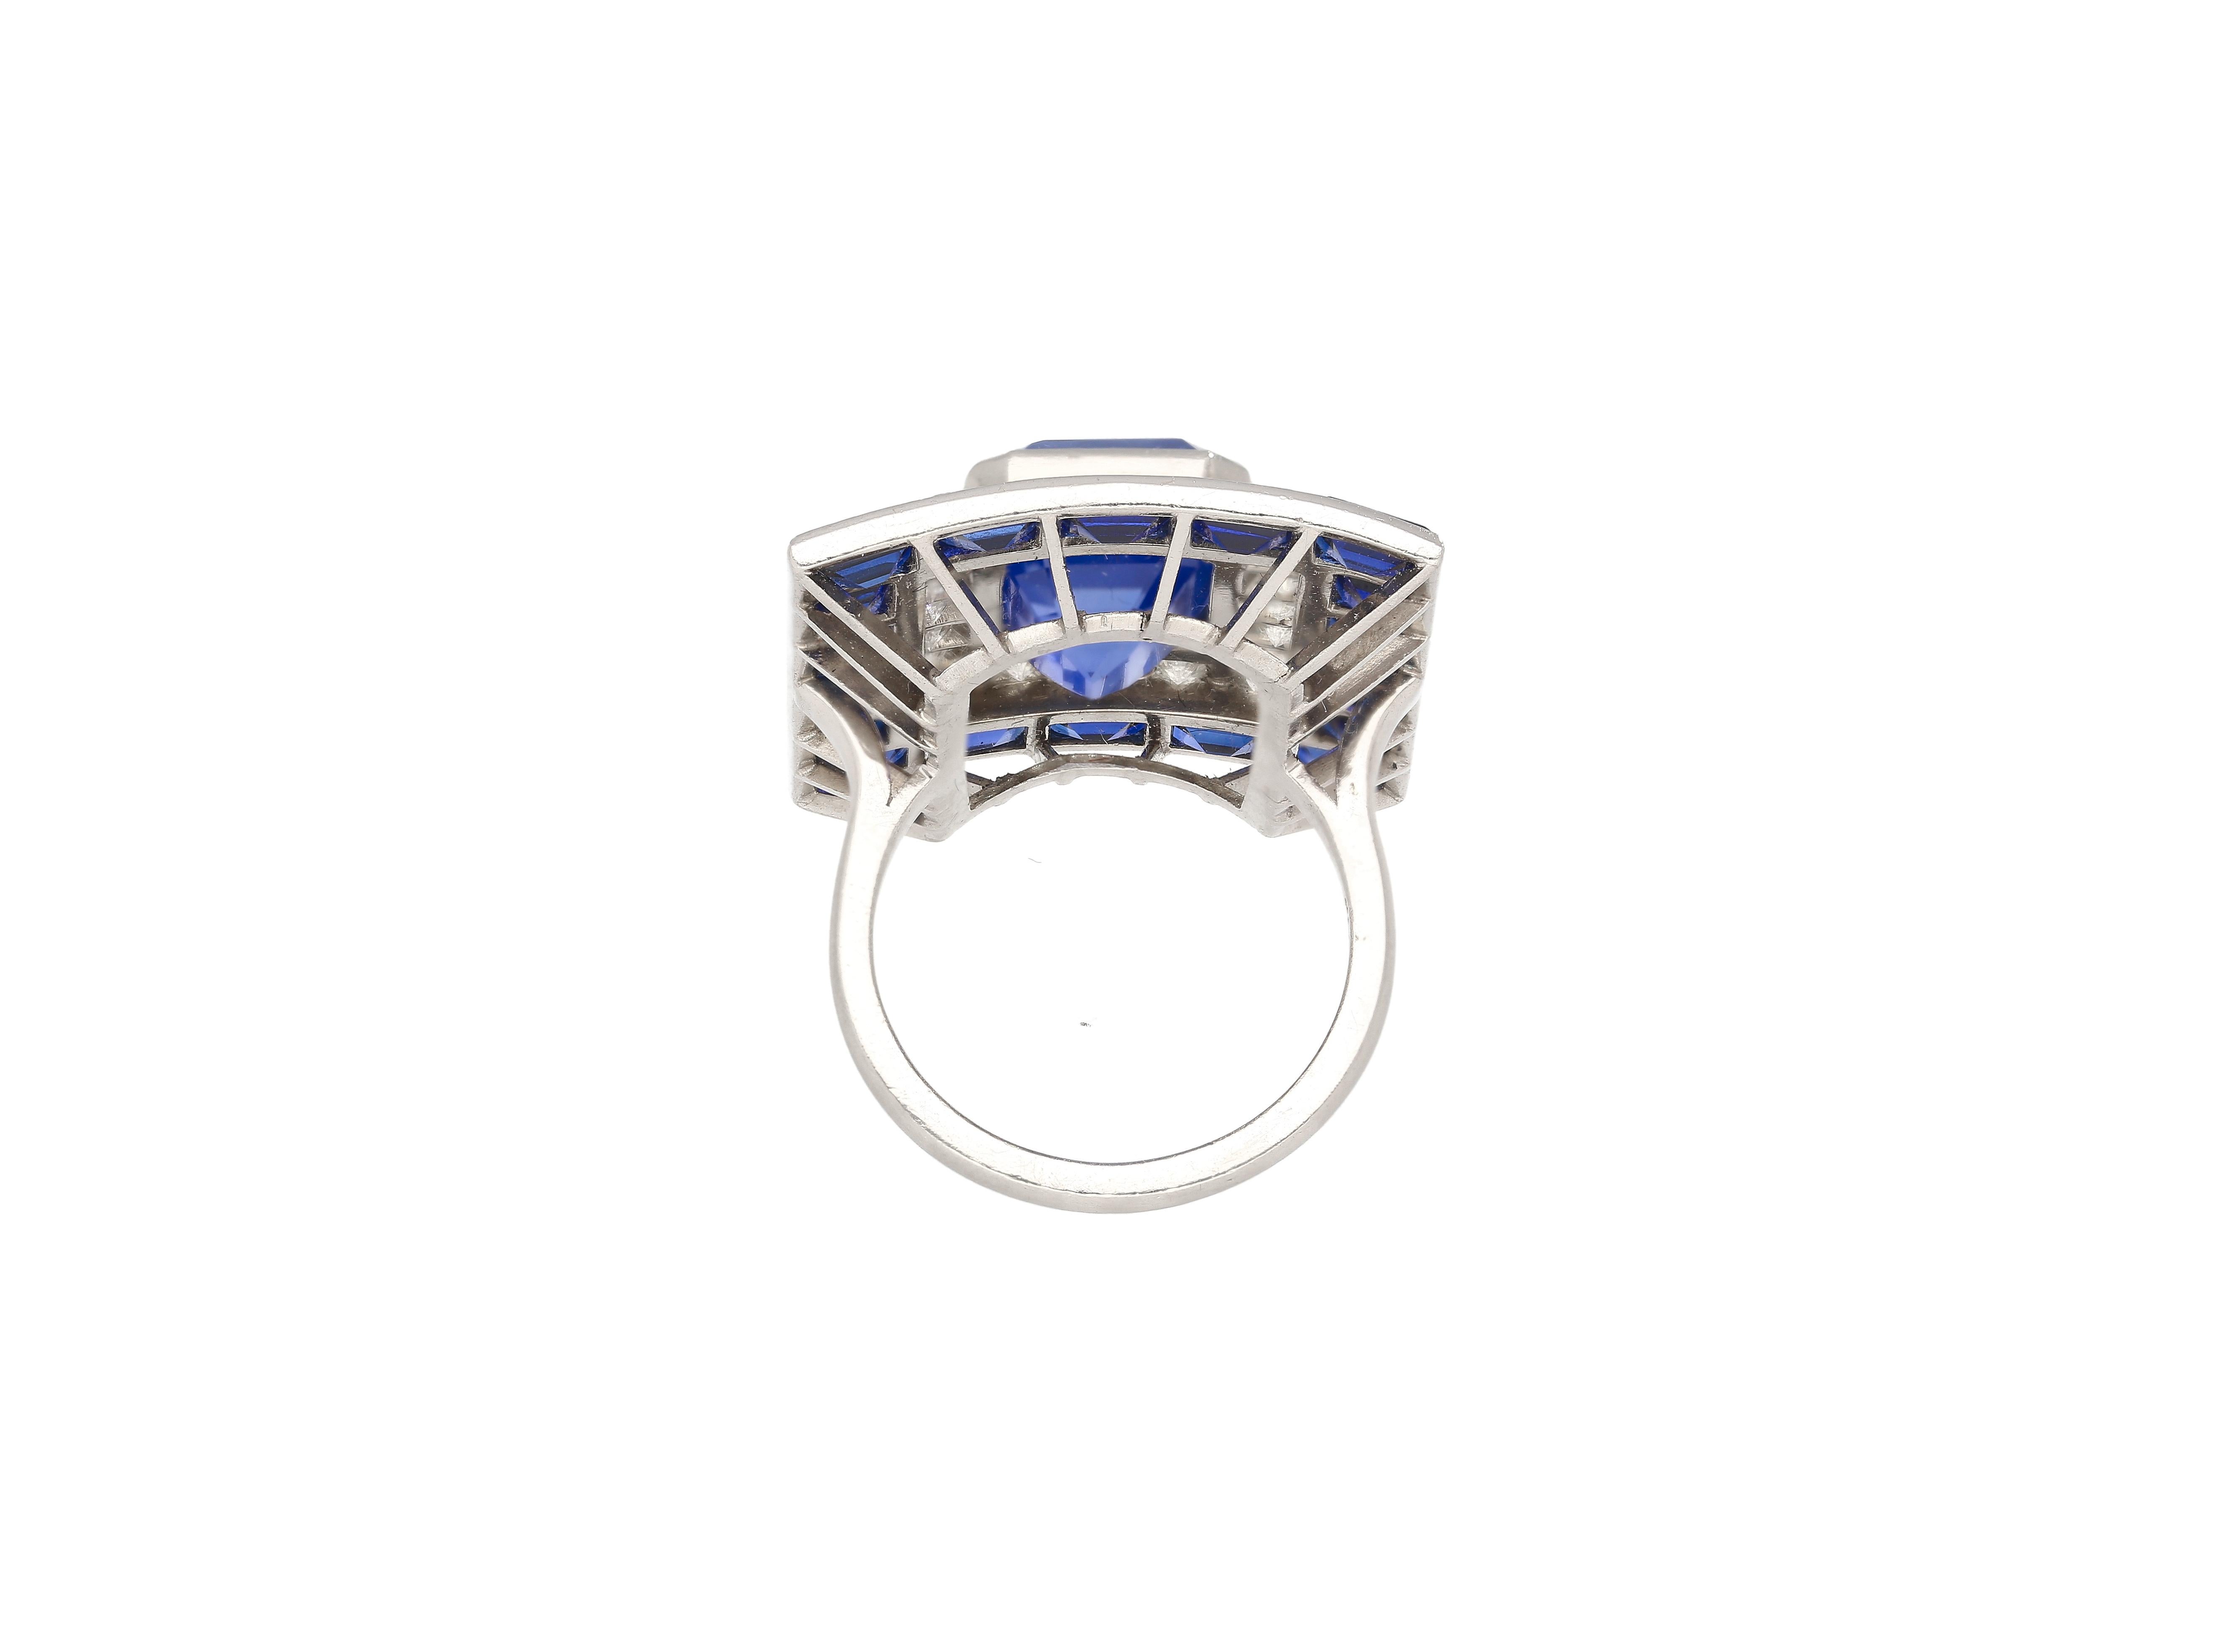 Presenting an exquisite Art Deco Platinum Ring, featuring a 10.82 carat emerald-cut no heat Ceylon Blue Sapphire, certified by GIA and AGL with treatment and origin report. The center stone is an emerald cut, octagonal shape, a vibrant blue color